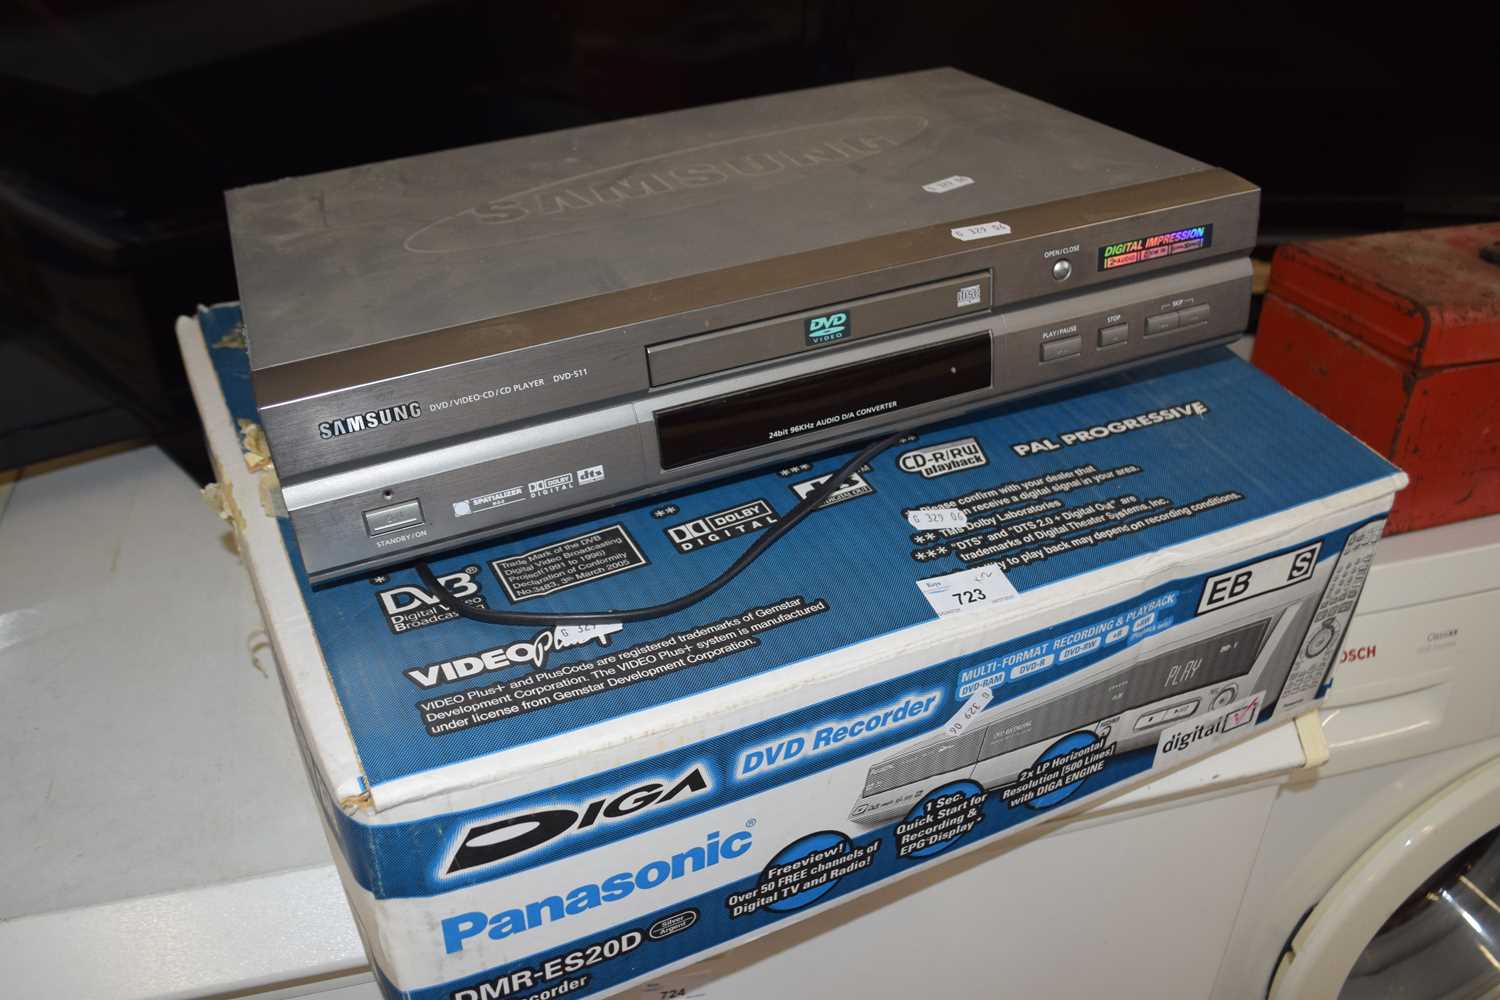 Panasonic DMR-ES20D DVD recorder, boxed together with a Samsung DVD-511 DVD video CD player (2)